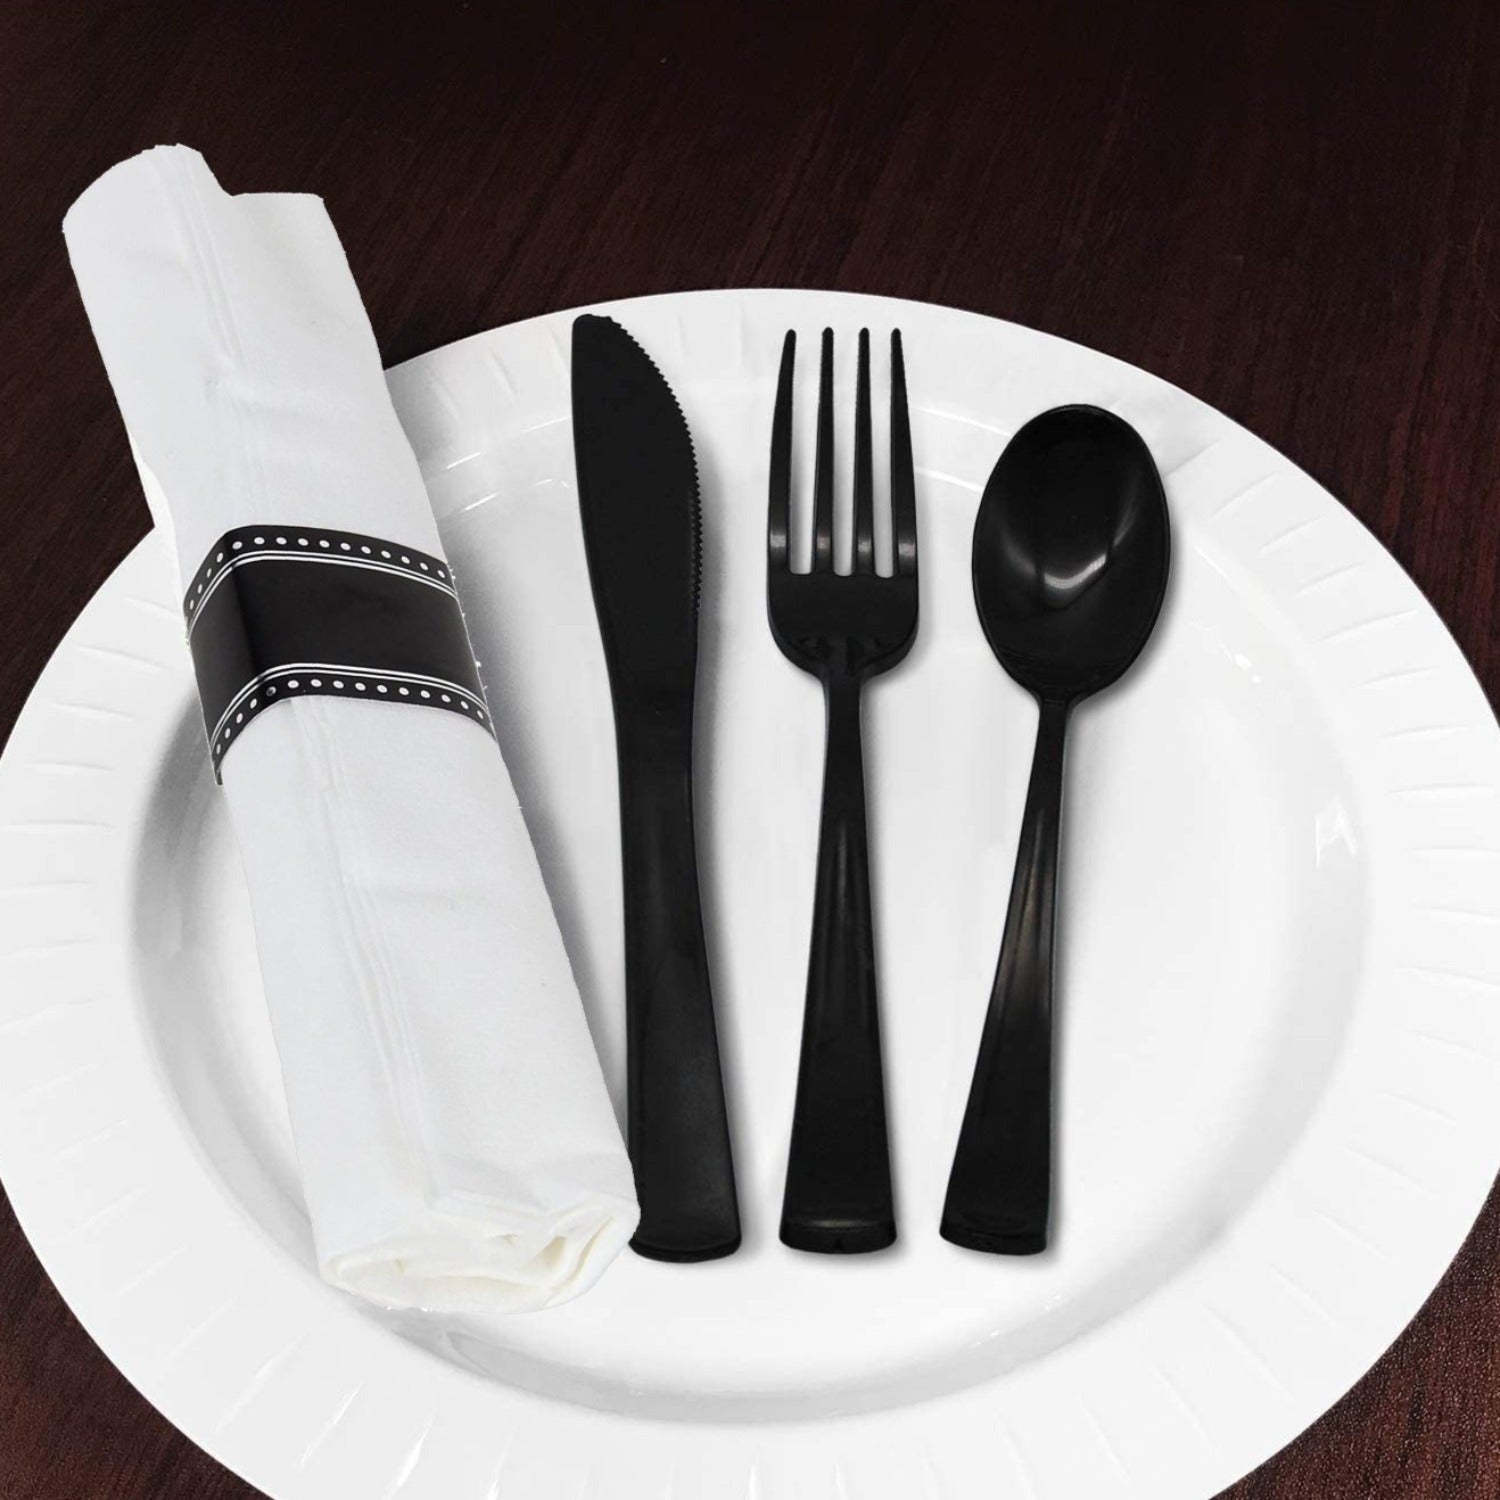 Pre-Rolled Cutlery And Napkin Black Set Tablesettings Lillian   